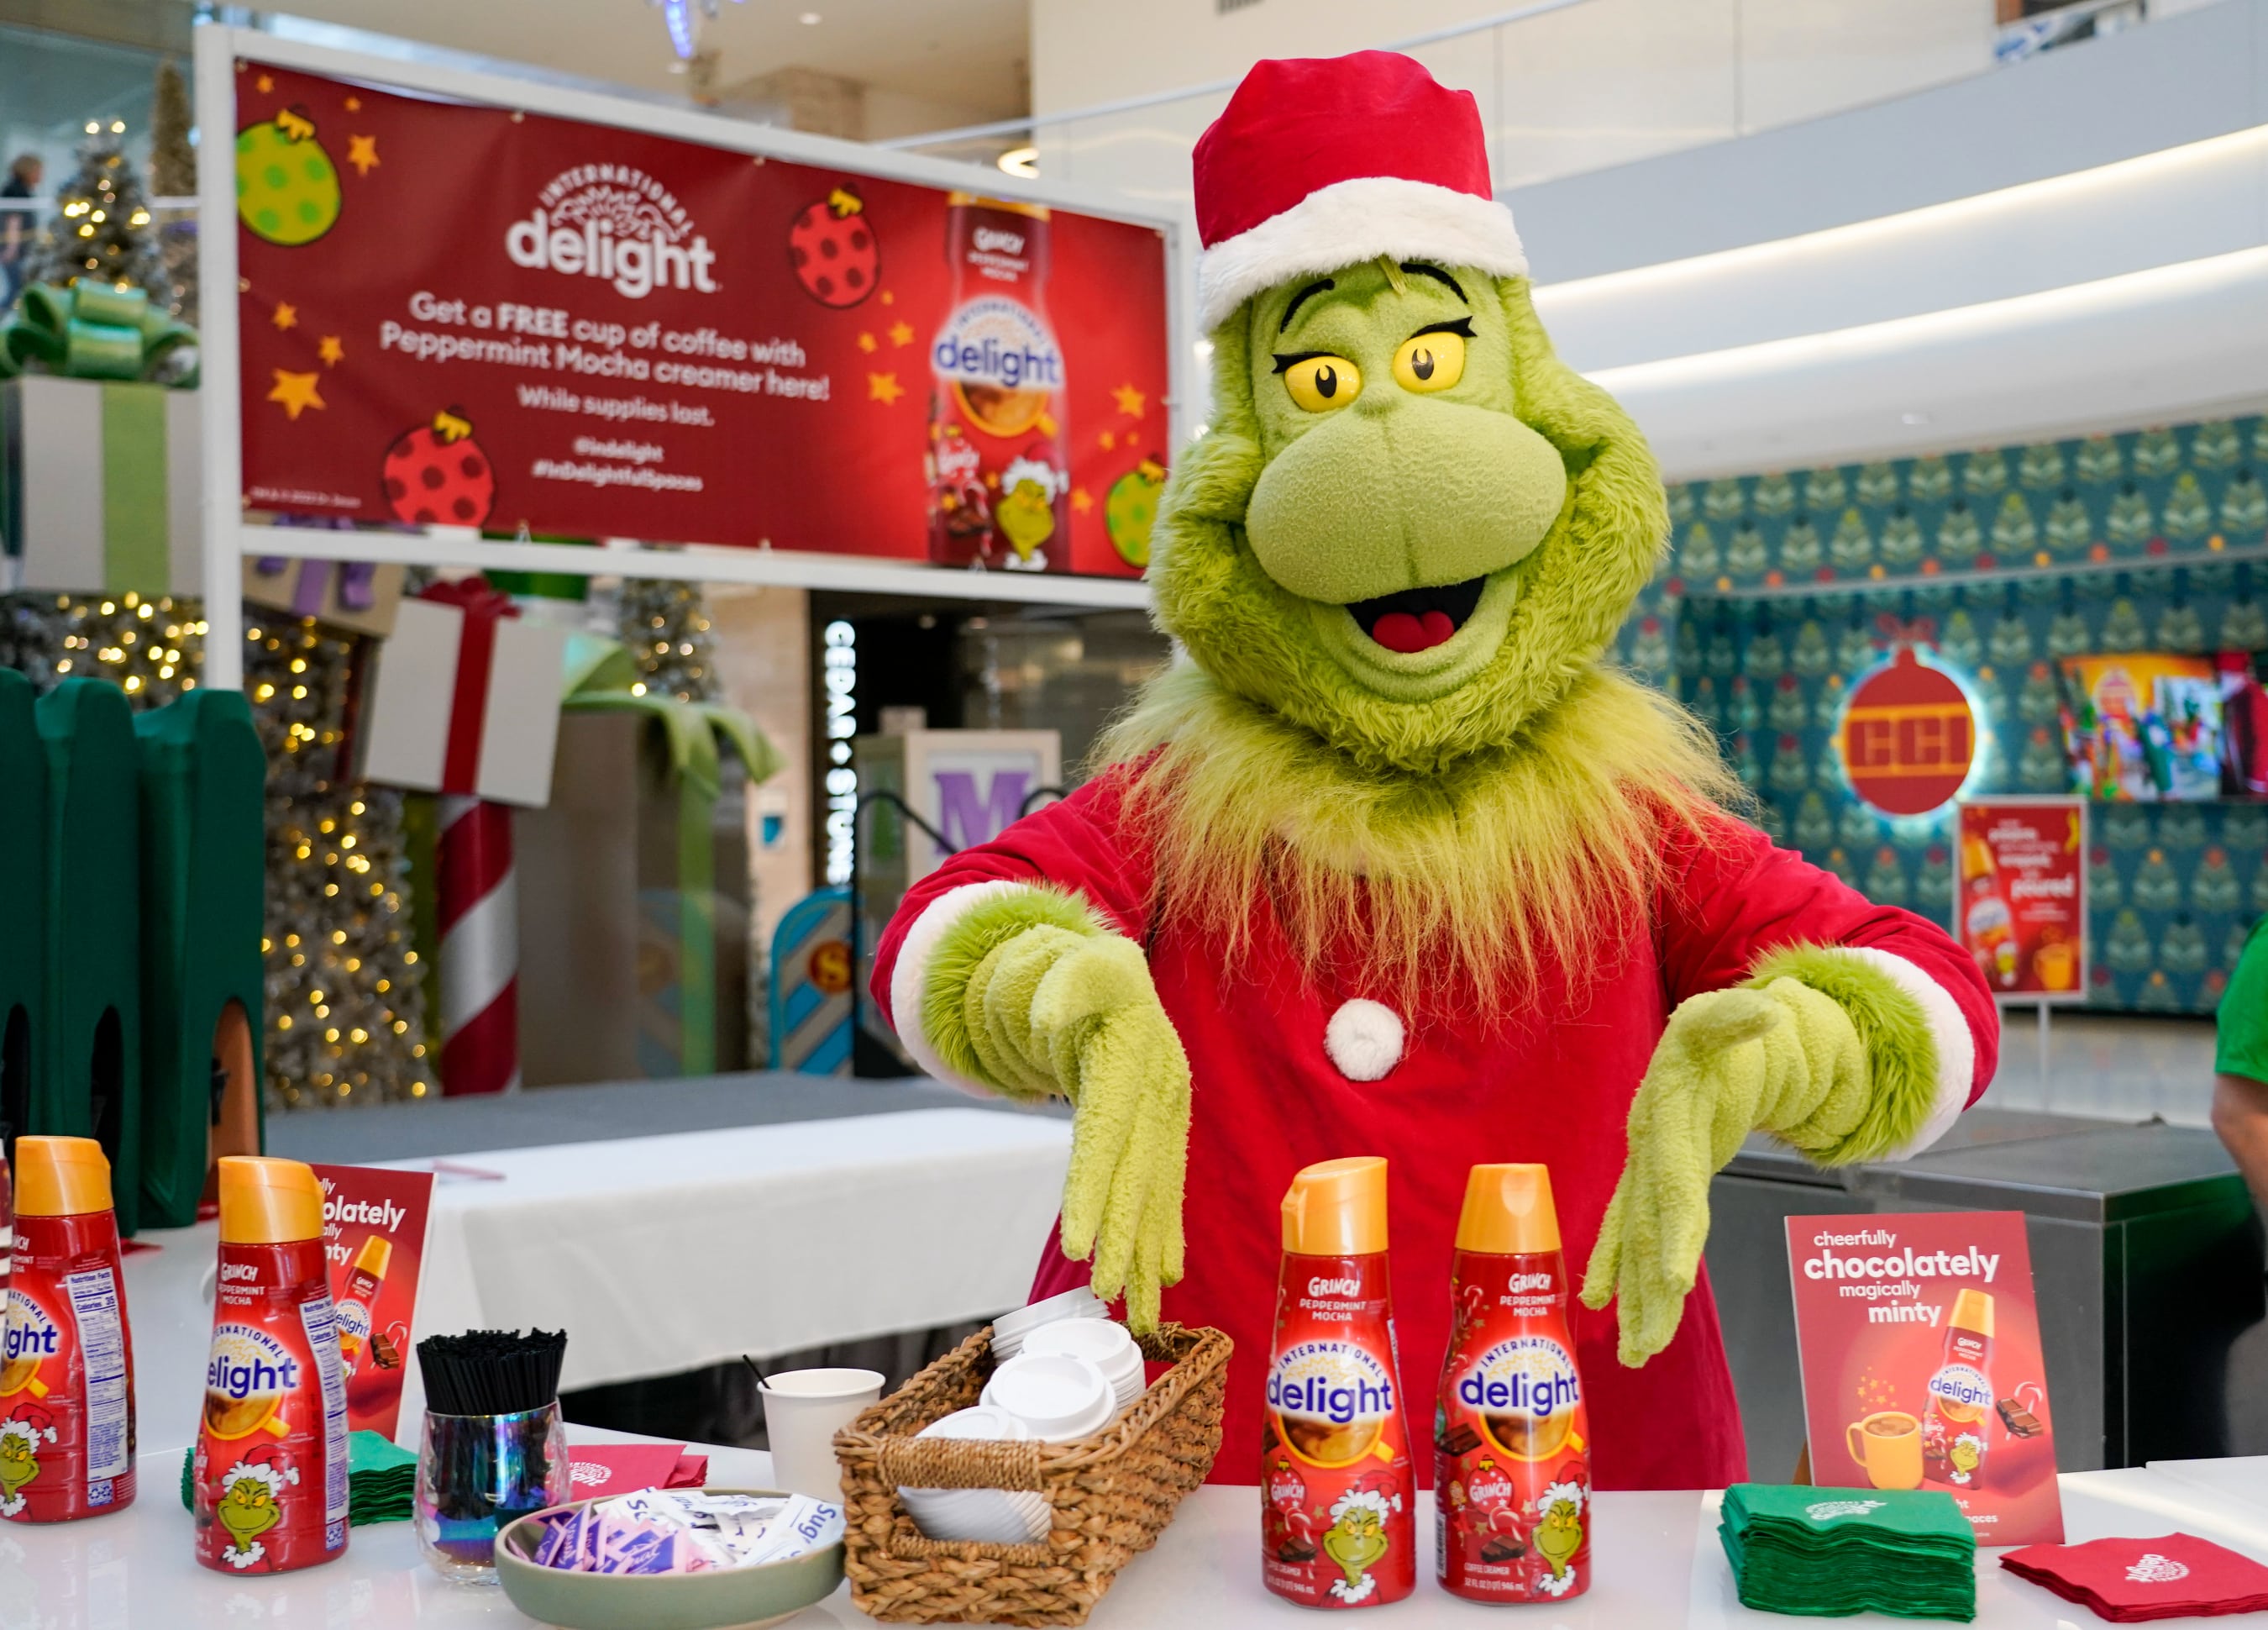 The Grinch serves up free coffee with International Delight Grinch Peppermint Mocha creamer at Mall of America